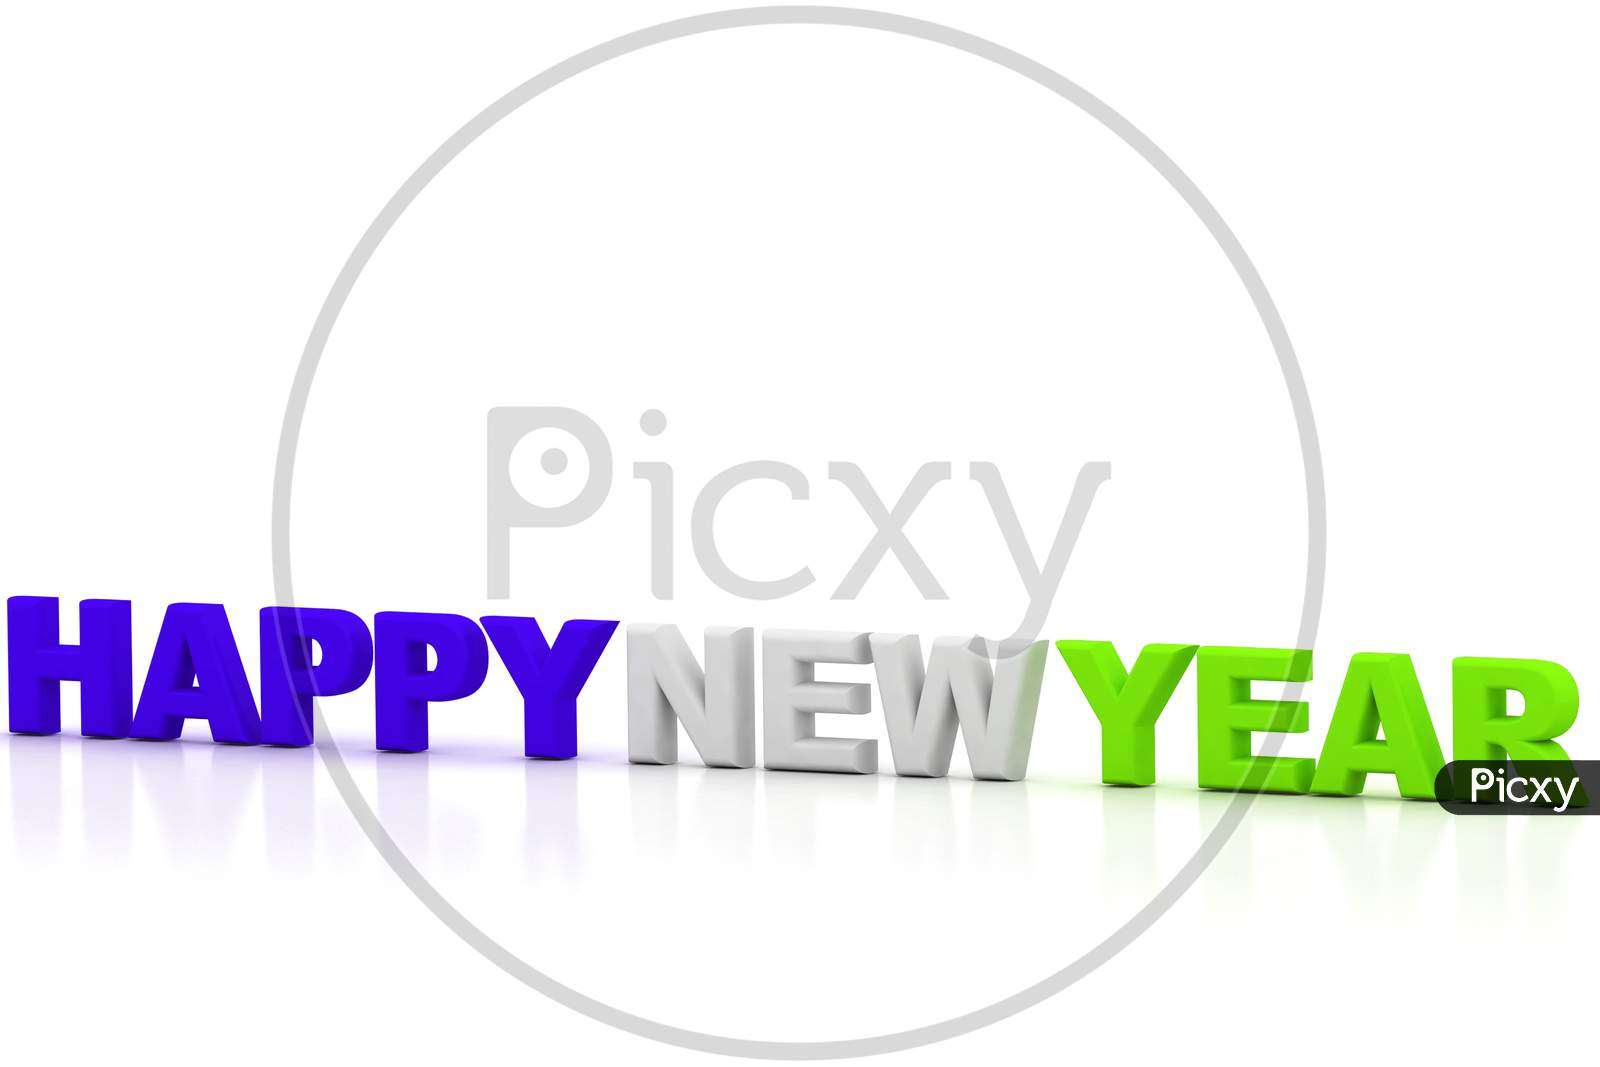 Happy New Year Text on White Background